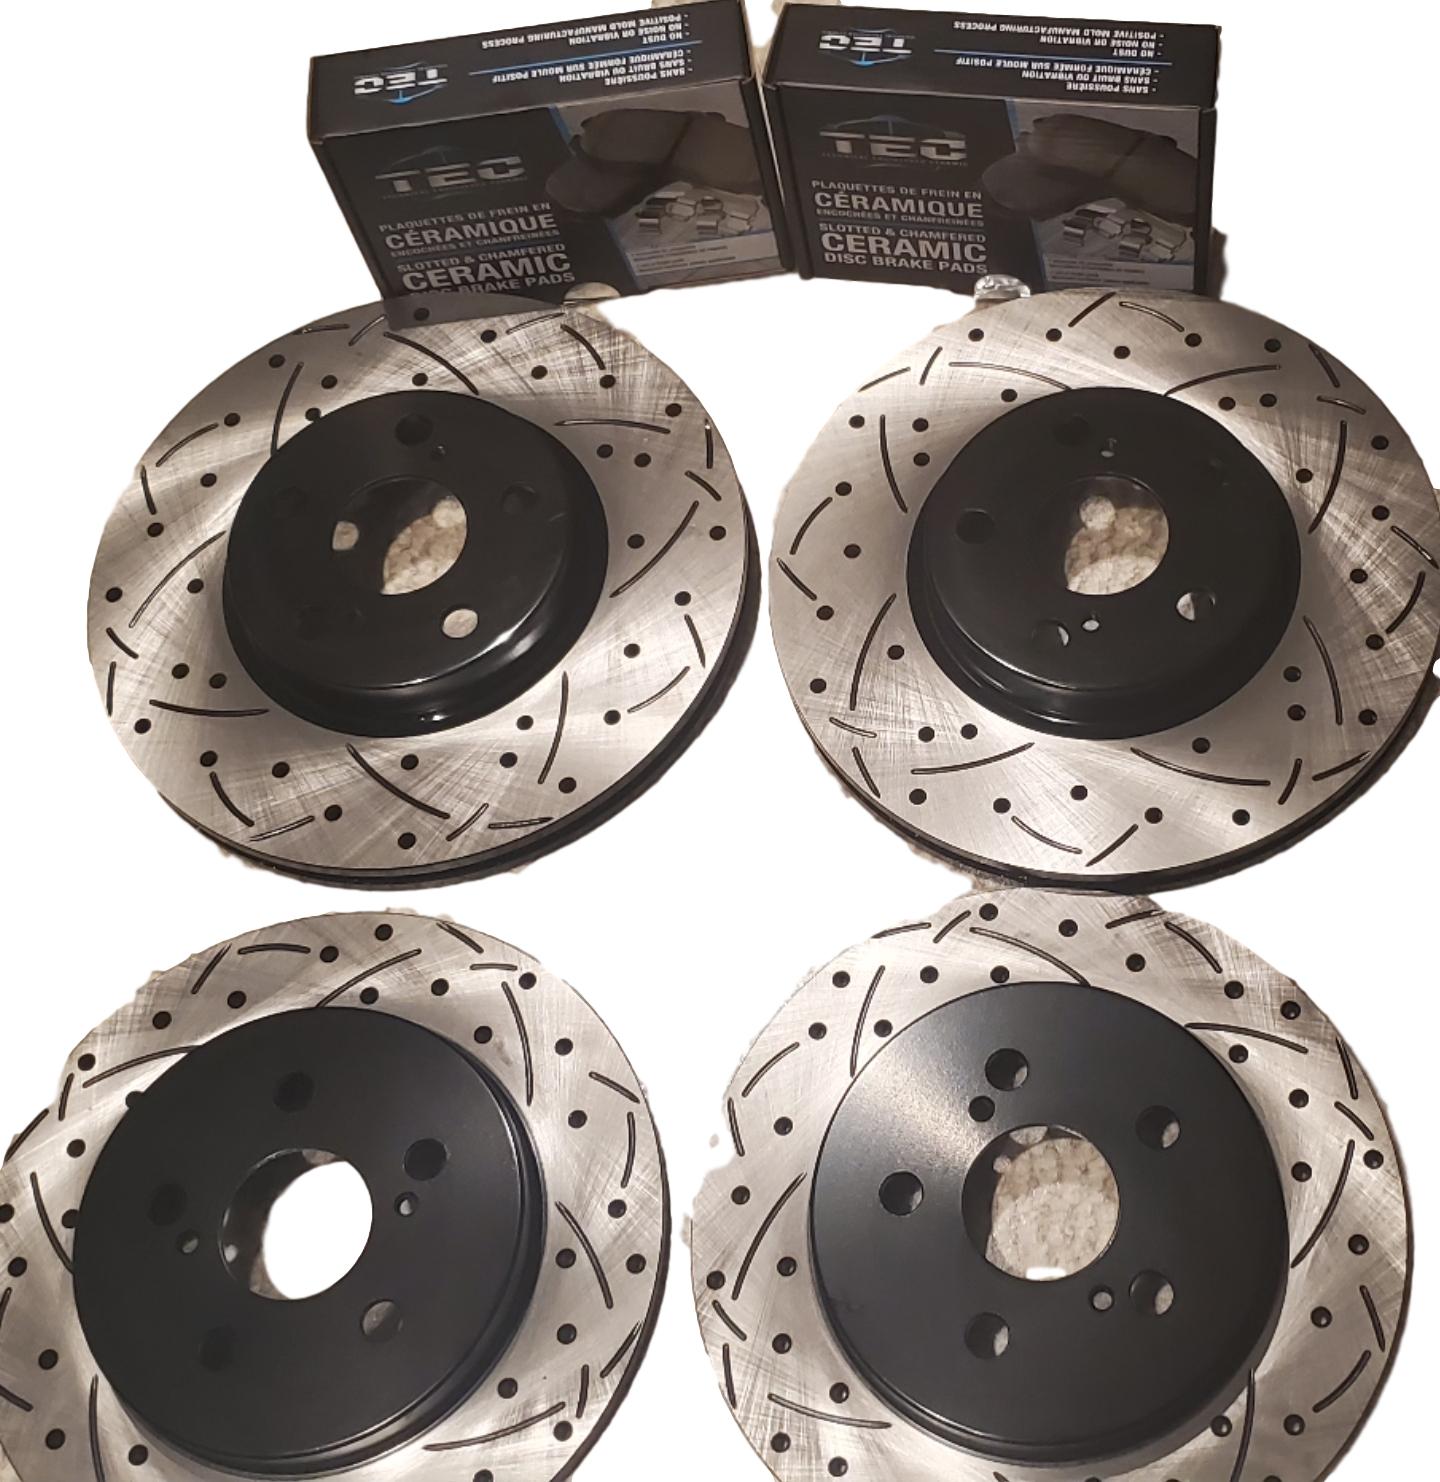 Volkswagen Jetta 1.8L Brake Kit Package Front and Rear Perforance Cross  Drilled/Slotted Rotors and Ceramic Brake Pad Set 2007 2008 2009 2010 2011  2012 2013 2014 2015 2016 - Get Your Parts - OEM Parts & Performance